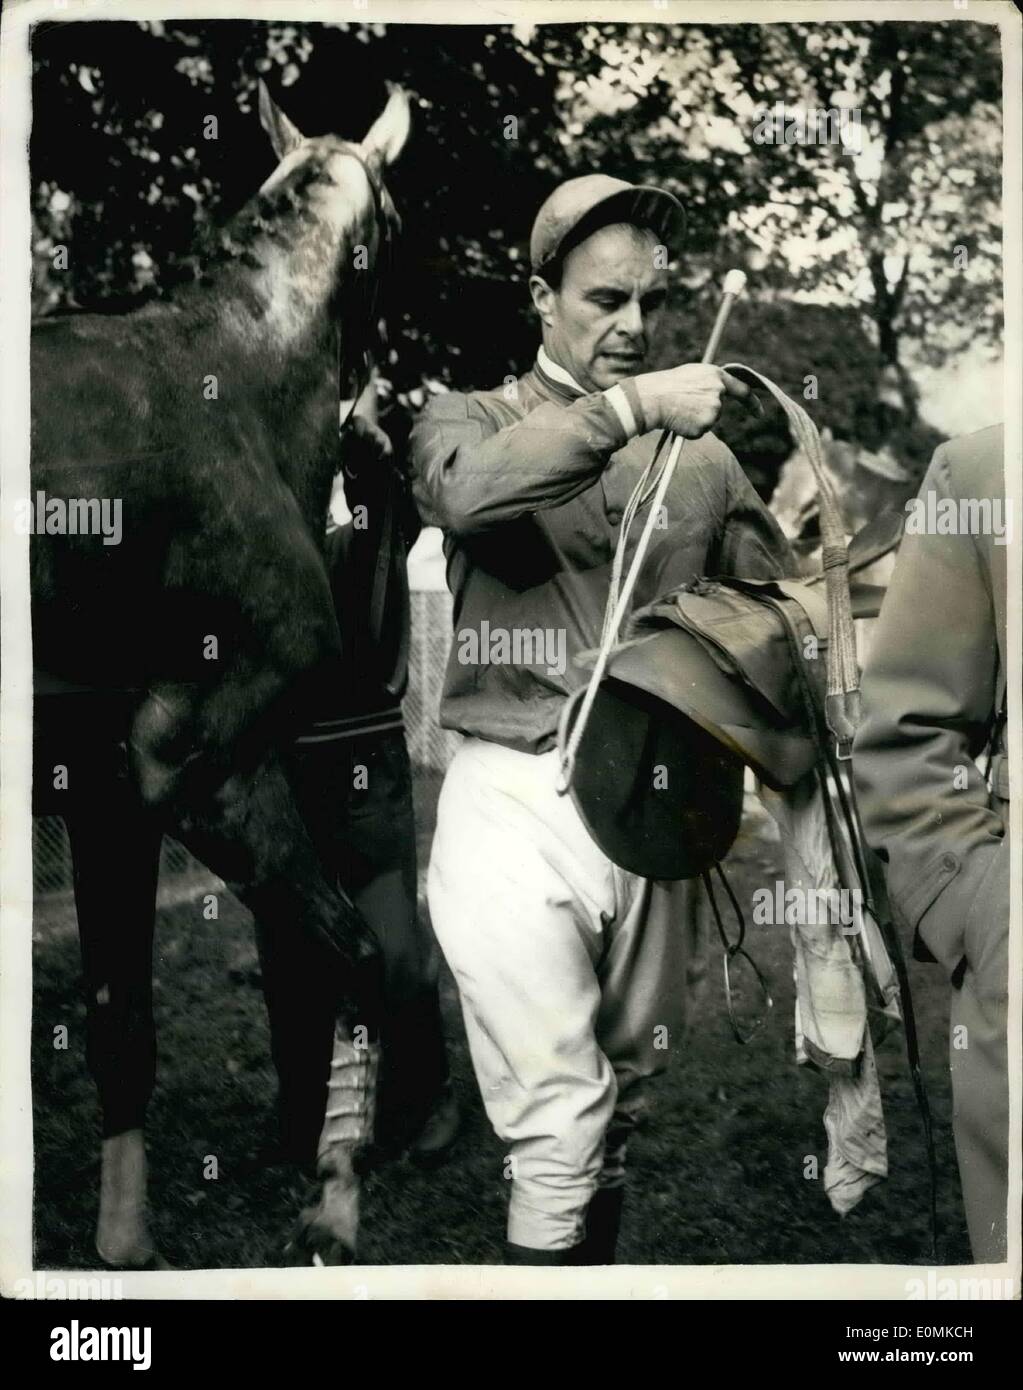 Oct. 10, 1955 - Aly Khan takes part in Gentleman riders race at Le tremblay.: Prince Aly Khan yesterday came second in a race for gentlemen riders - at Le Tromblay, France- Also taking part in the race was Groups Captain Peter Townsend, who finished. Photo shows Prince Aly Khan, in riding kit - at Le Tremblay yesterday. Stock Photo